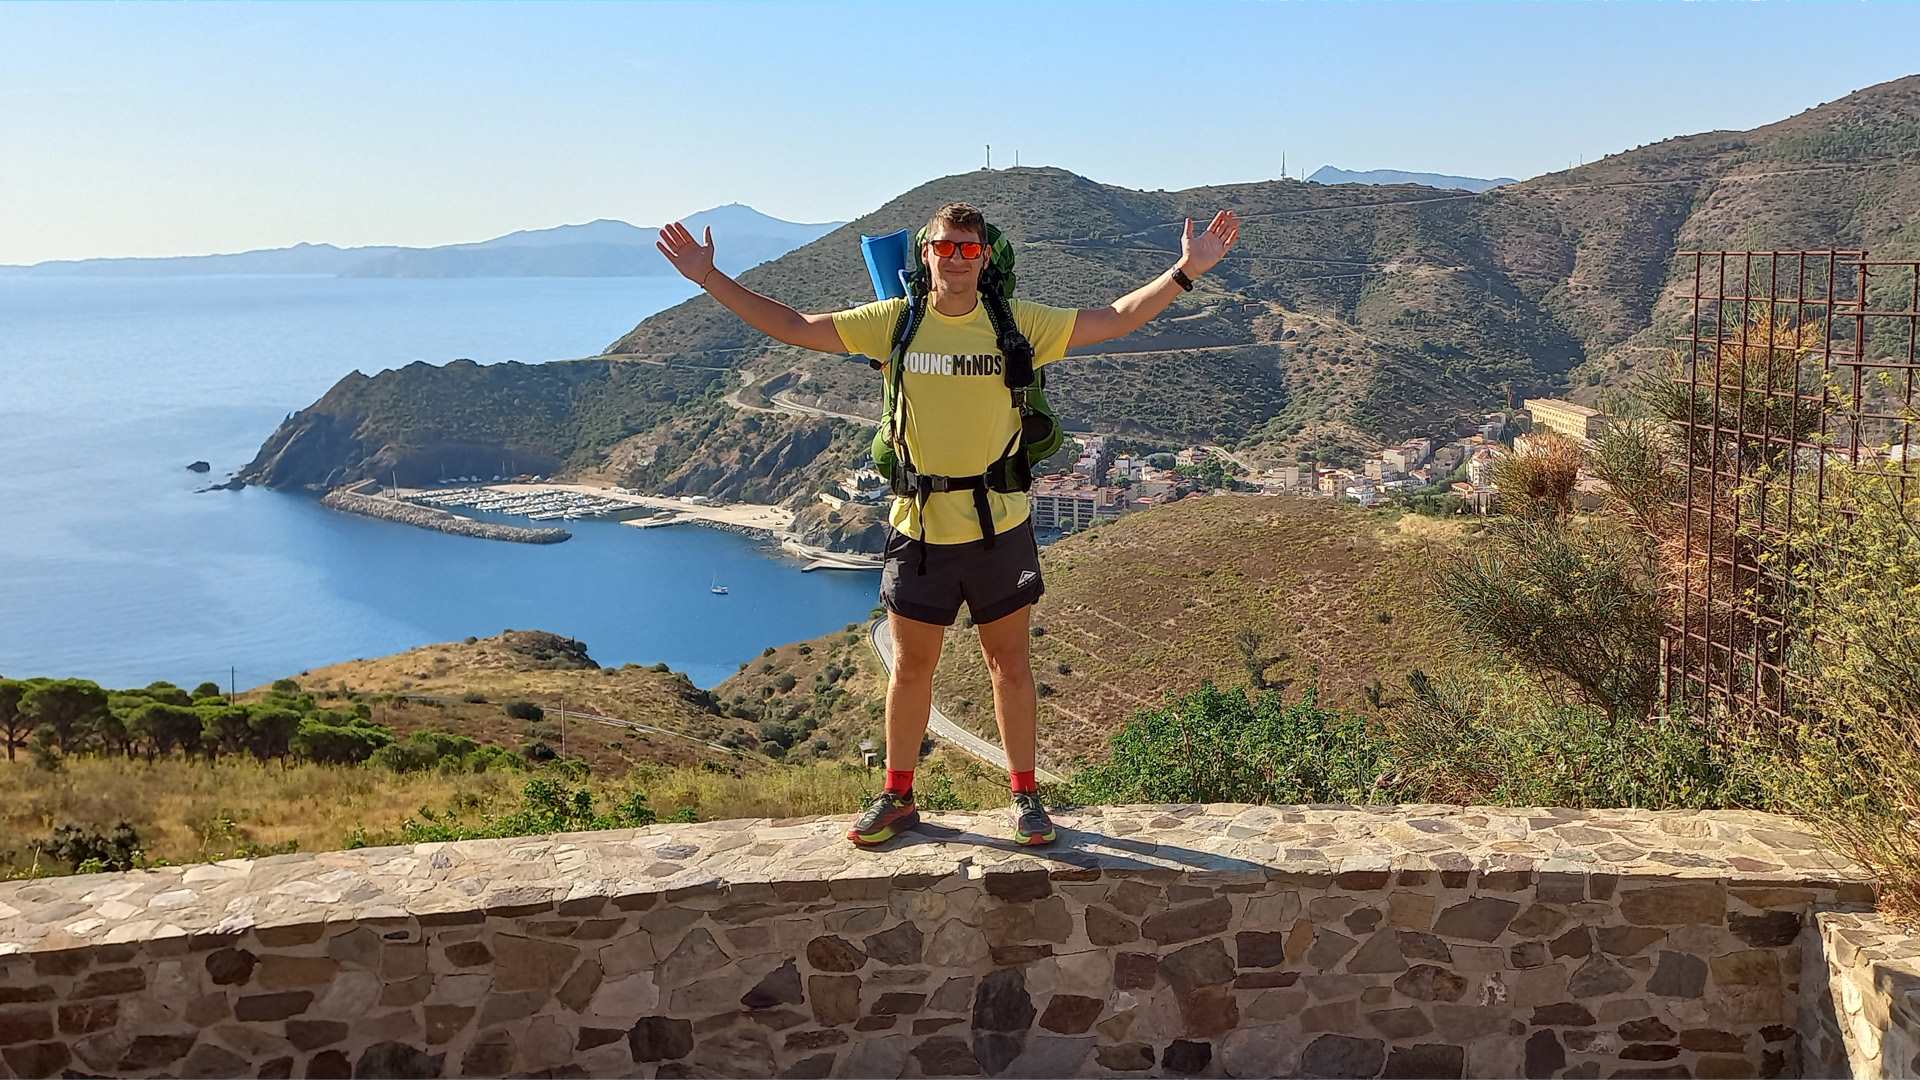 Michael Evans standing on a wall on his trip around Spain.